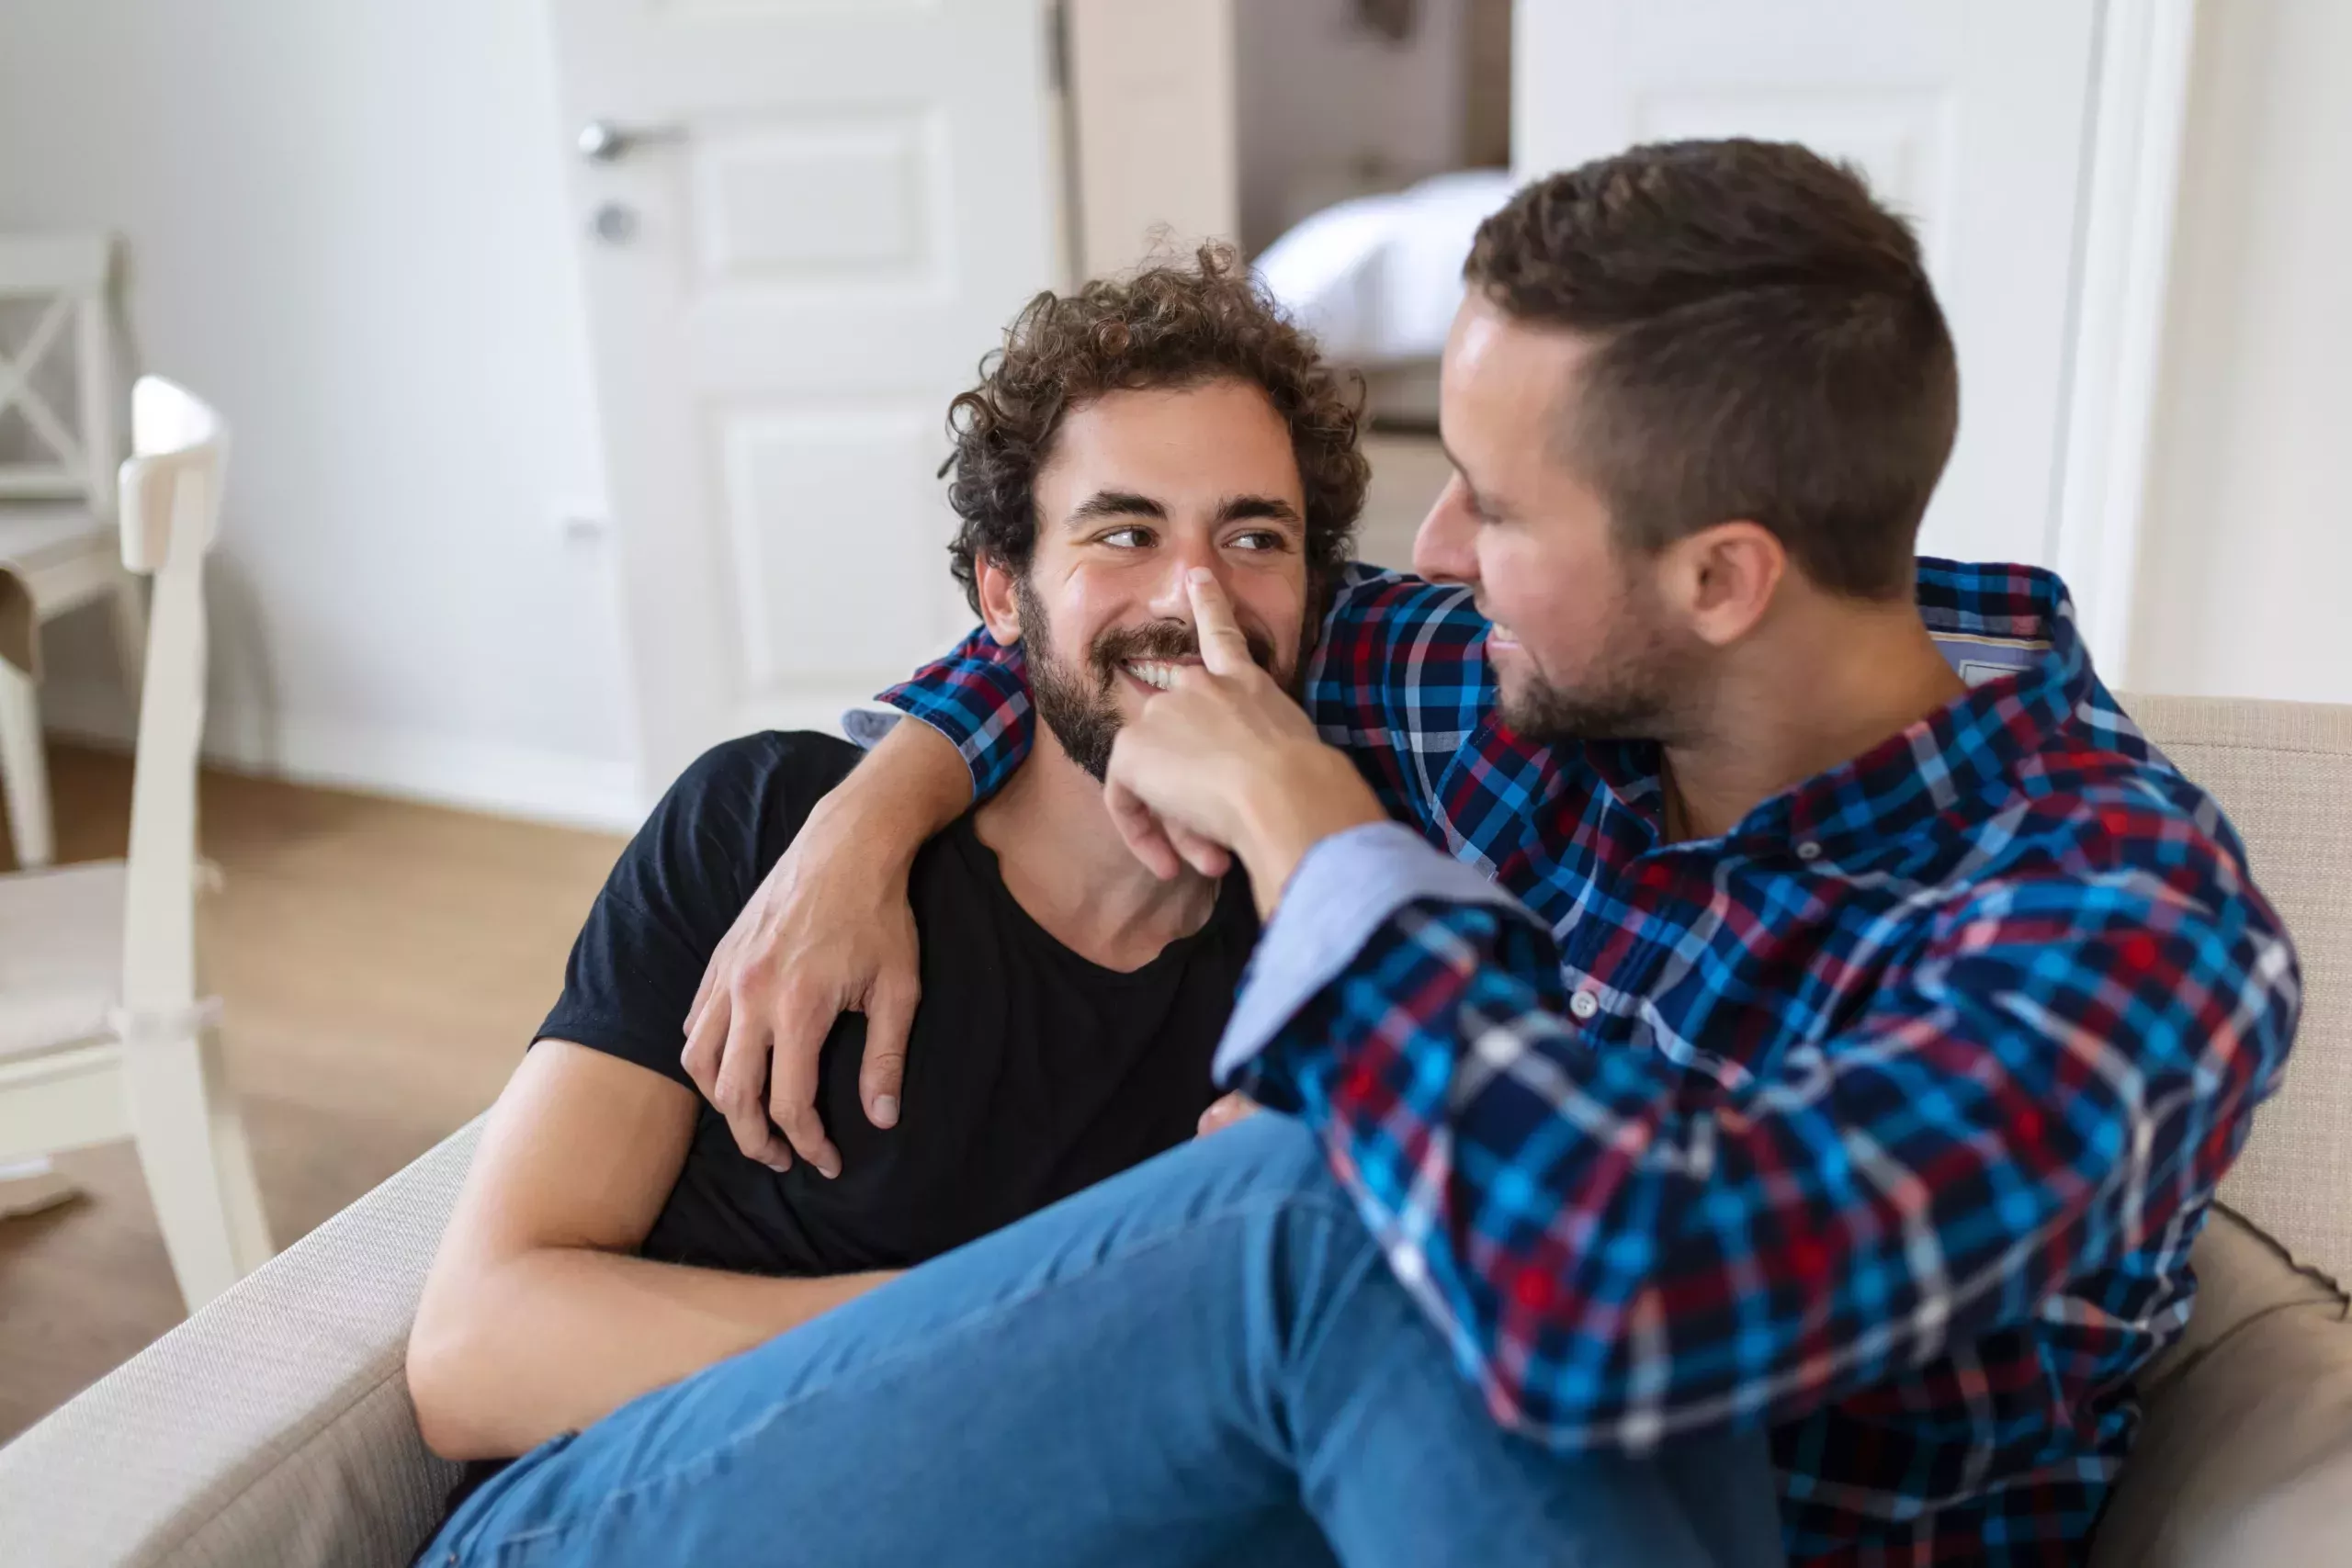 Two men sharing a close and joyful moment on a couch, with one man playfully touching the other's nose. They are both smiling and seem to be engaged in a lighthearted and affectionate conversation, creating an atmosphere of comfort and intimacy. Their queer love language would be physical touch.